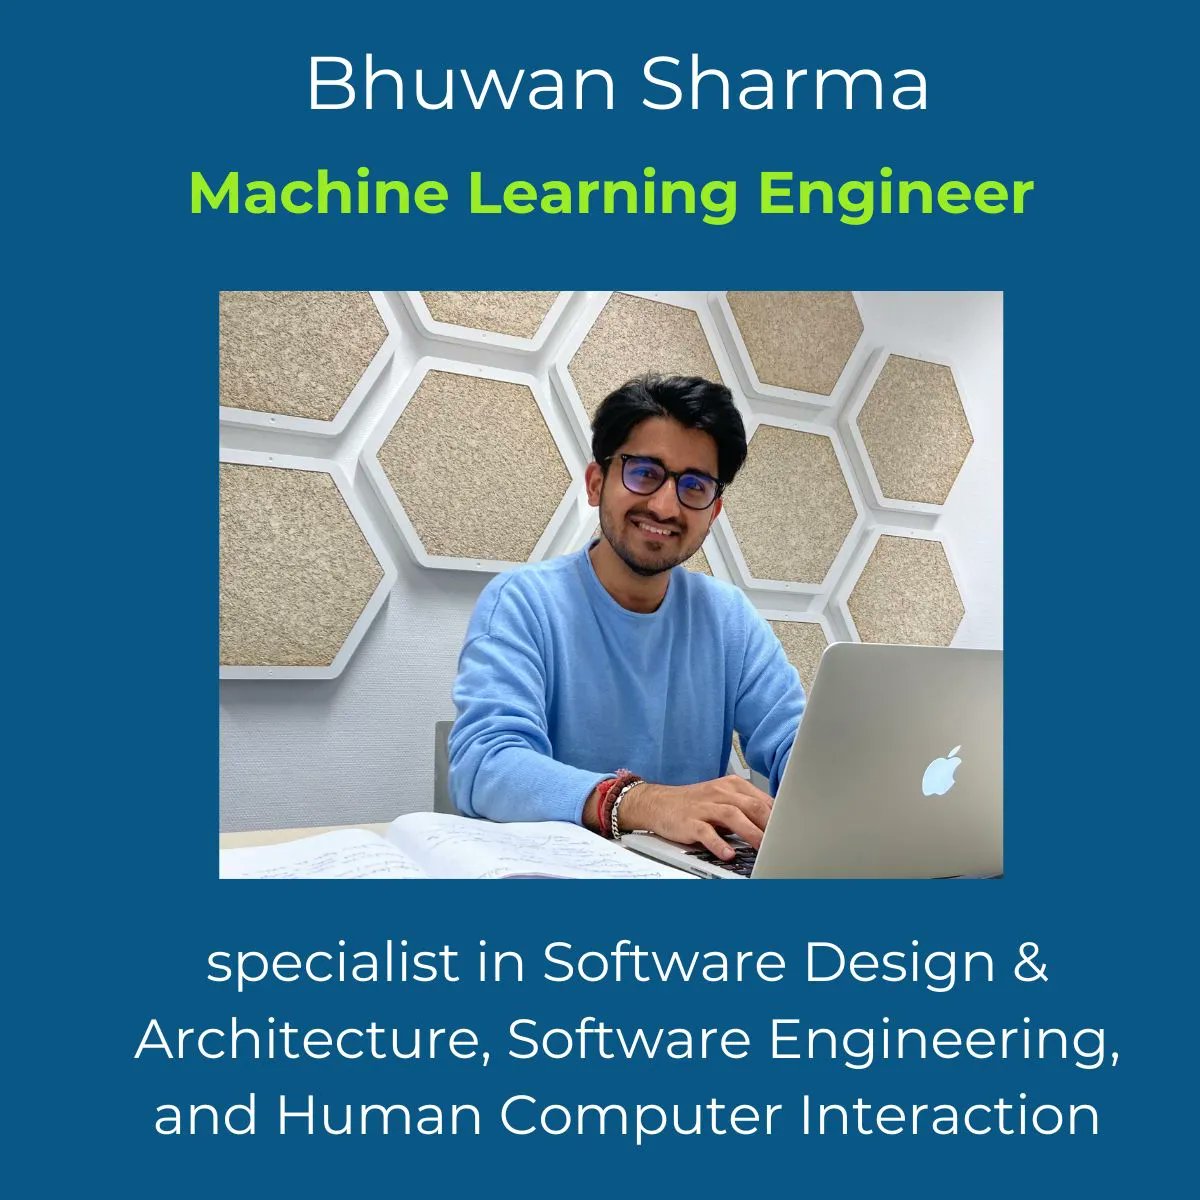 #teamprofile #meettheteam
Bhuwan is not only our go to person for AI and Machine Learning, he is also an amazing team player, always curious about ways in which he can contribute to the team's efforts and performance. 
#arthritis #awareness #dowhatyoulove @liaonet #startupjob